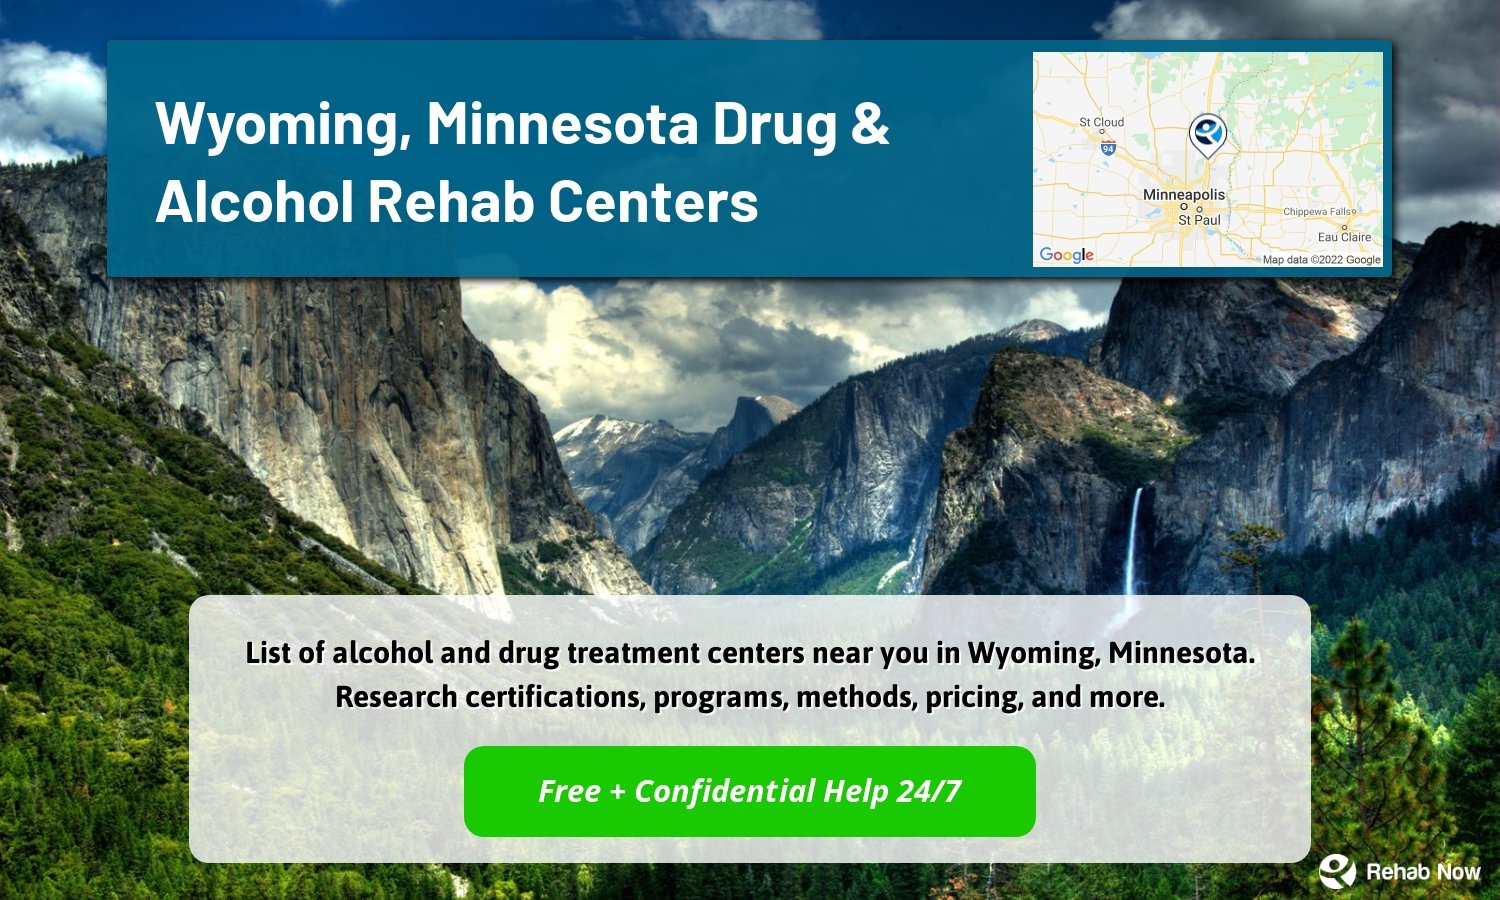 List of alcohol and drug treatment centers near you in Wyoming, Minnesota. Research certifications, programs, methods, pricing, and more.